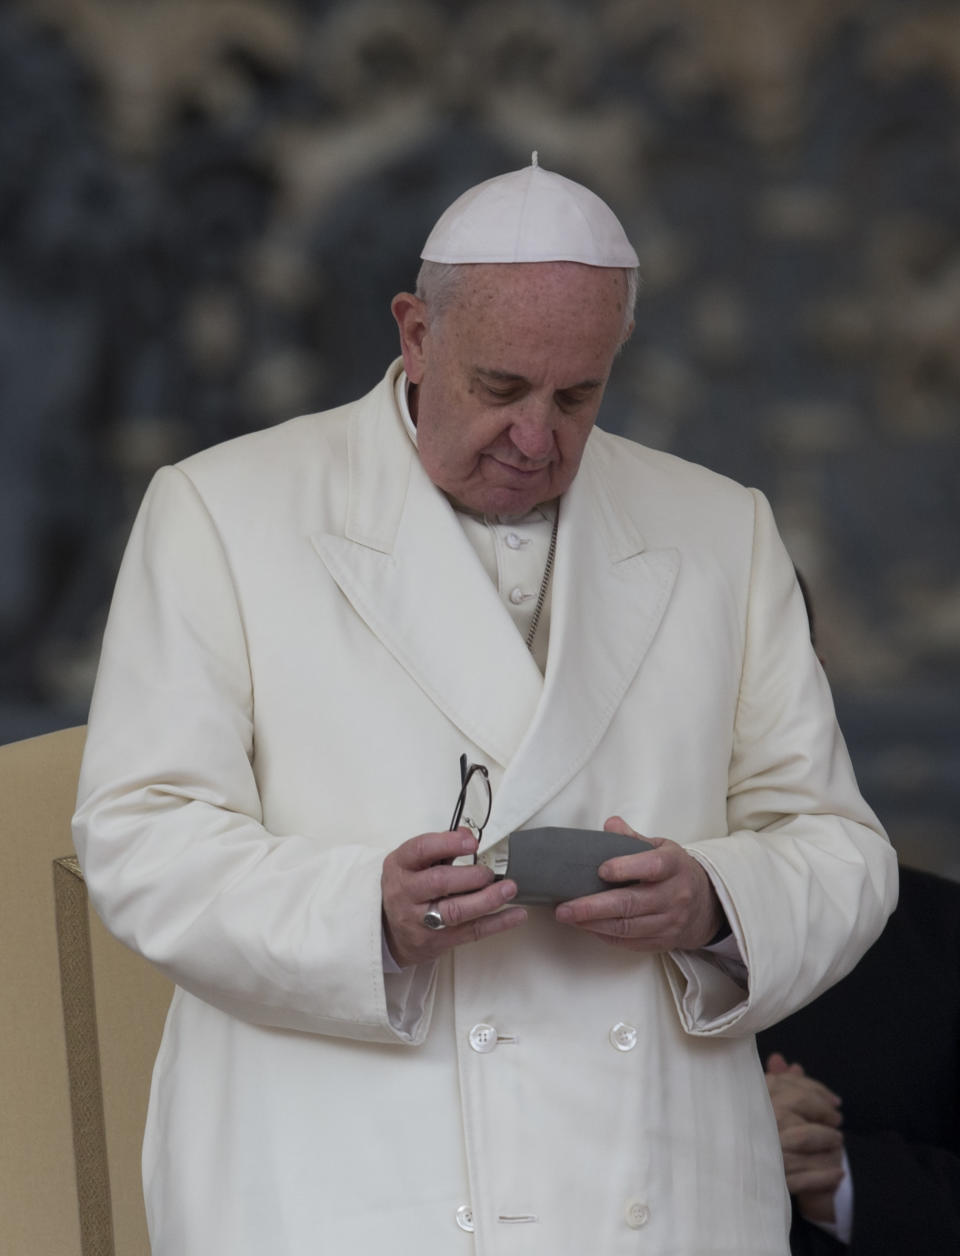 Pope Francis holds his glasses at the end of his weekly general audience in St. Peter's Square at the Vatican, Wednesday, Feb. 5, 2014. A U.N. human rights committee denounced the Vatican on Wednesday for “systematically” adopting policies that allowed priests to rape and molest tens of thousands of children over decades, and urged it to open its files on the pedophiles and the bishops who concealed their crimes. (AP Photo/Alessandra Tarantino)